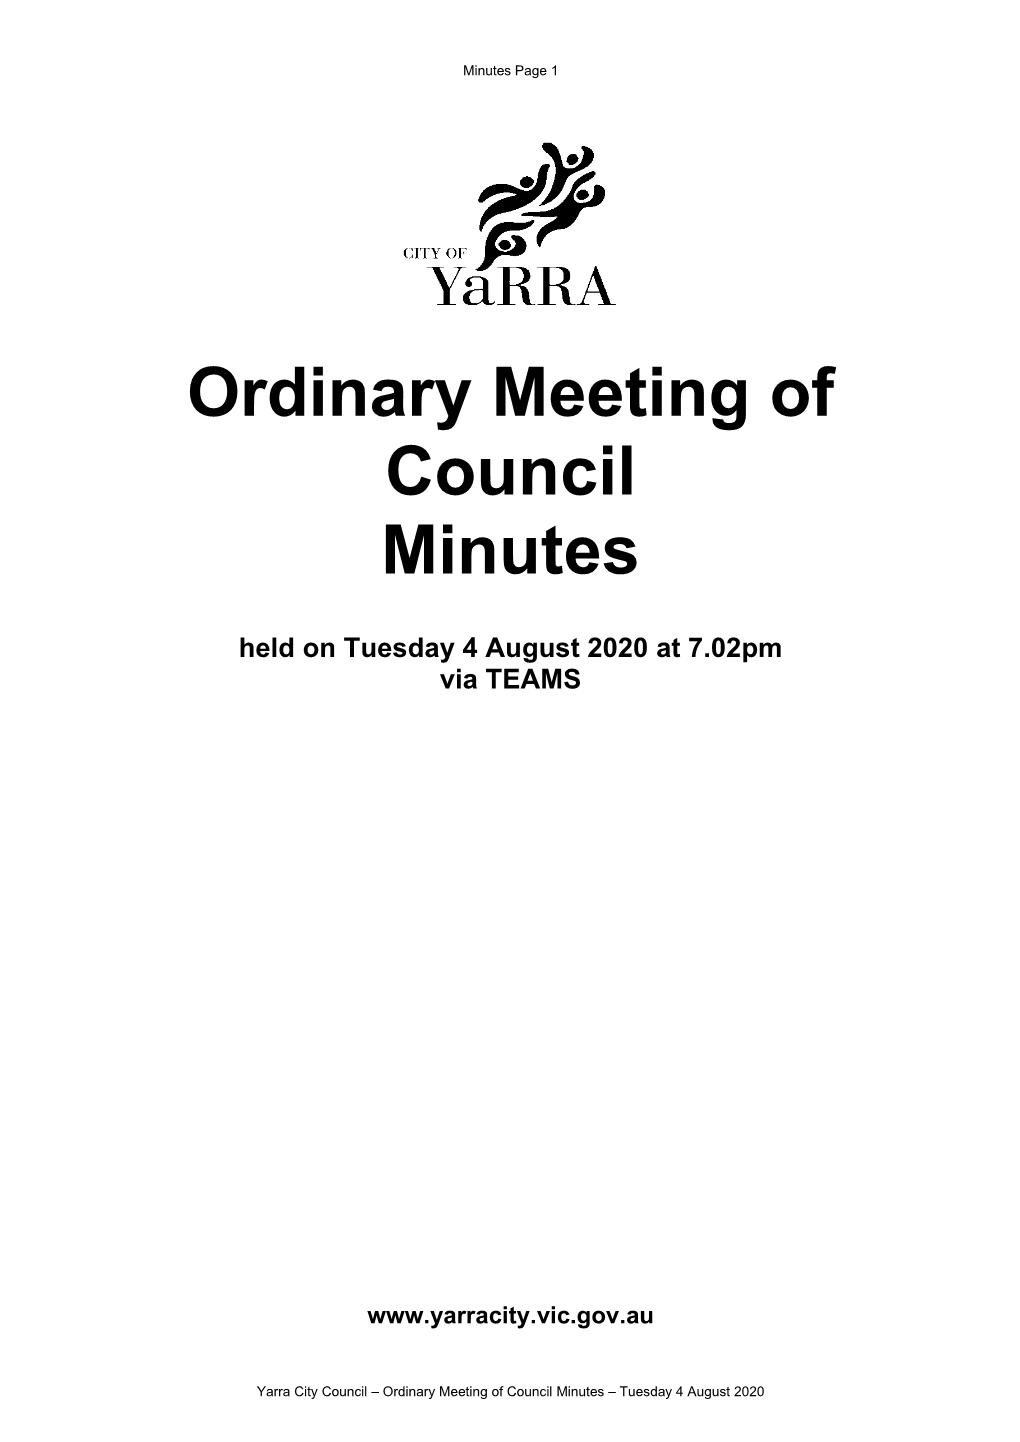 Minutes of Ordinary Council Meeting